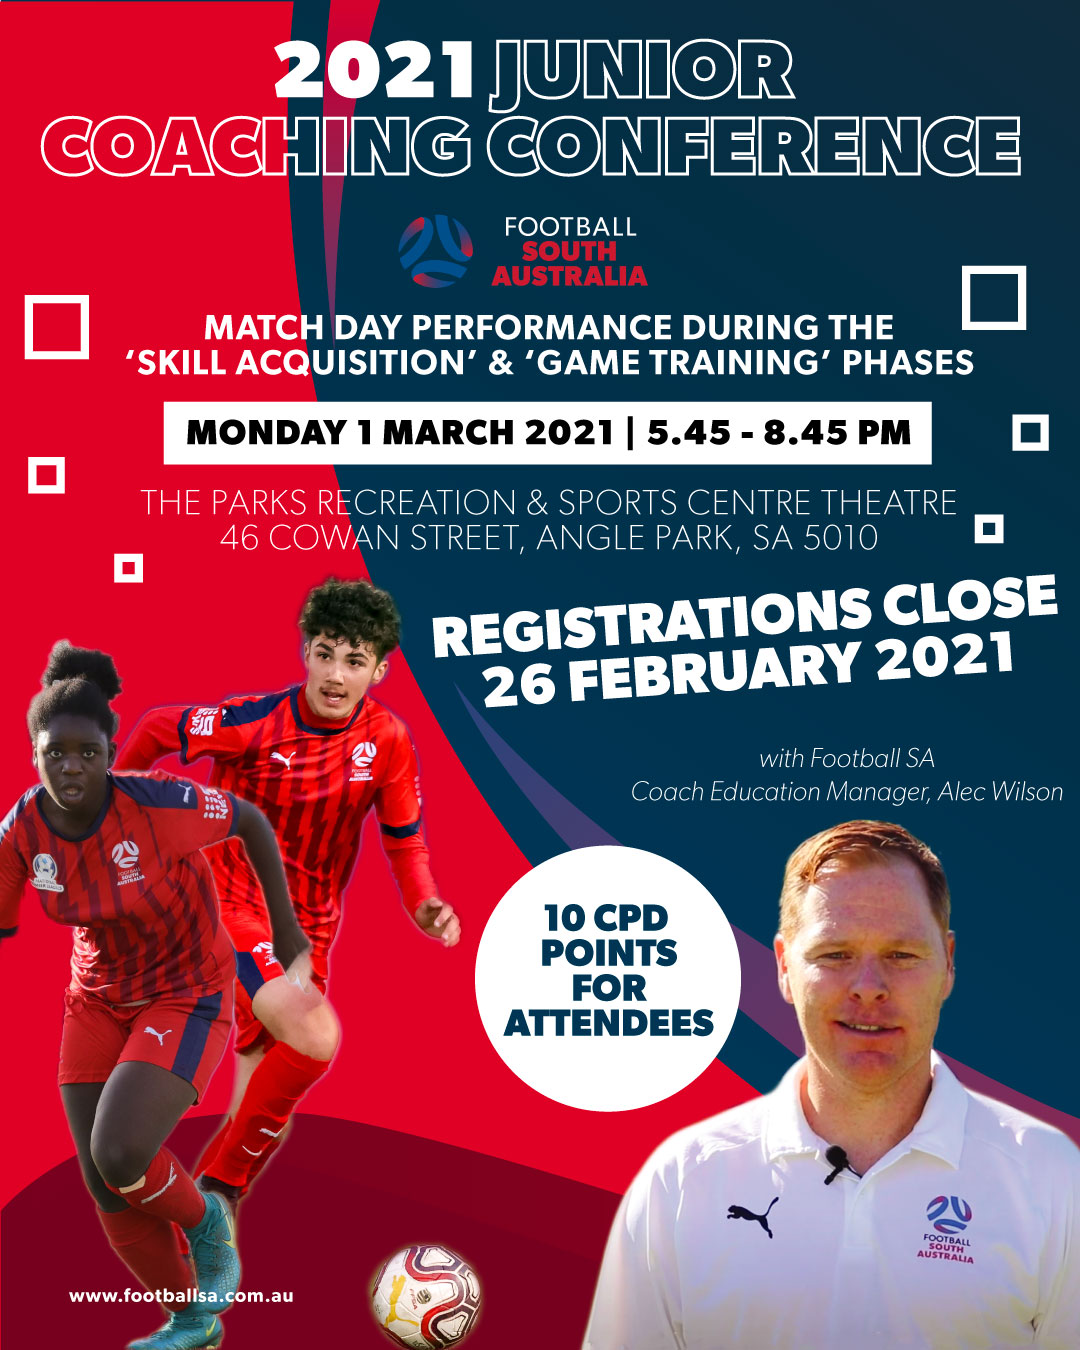 Junior Coaching Conference